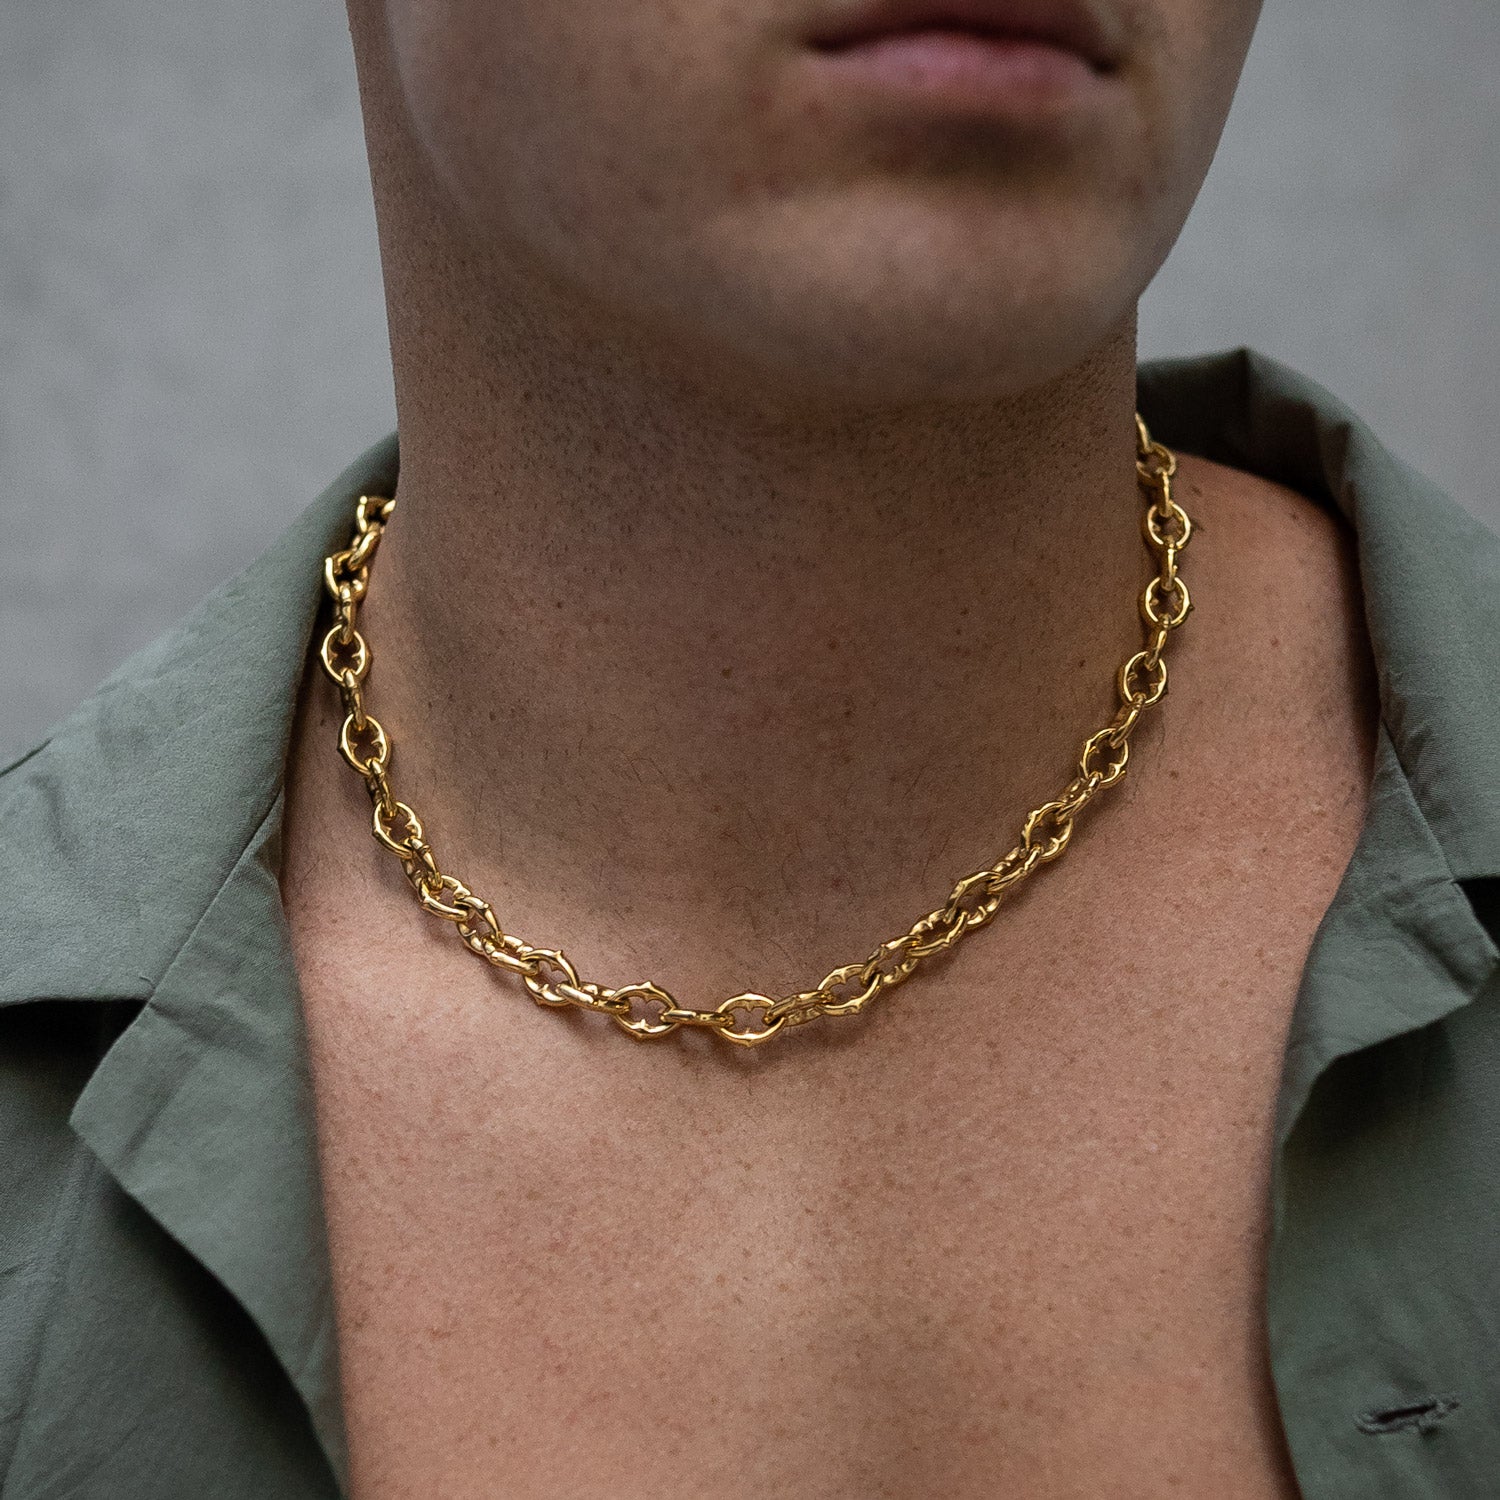 Mens spiked choker in gold